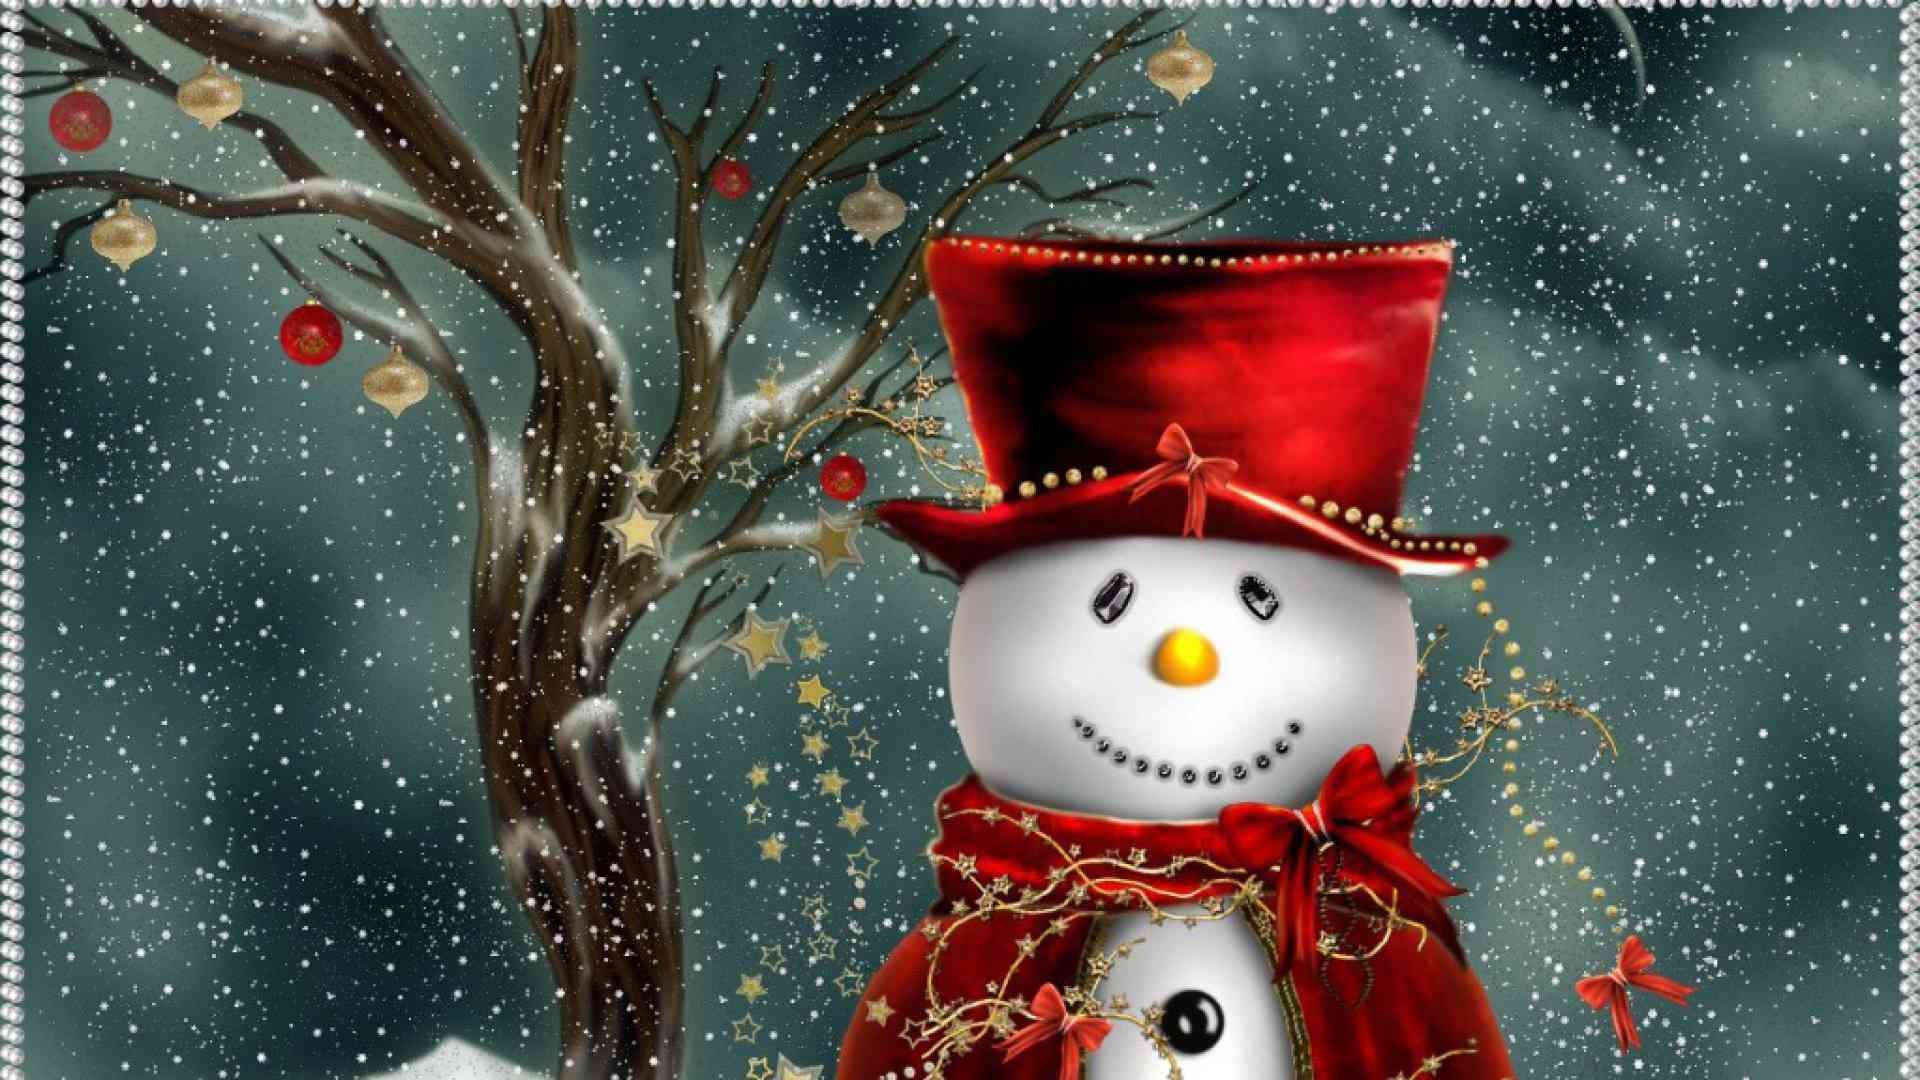 1920x1080 A snowman wearing red